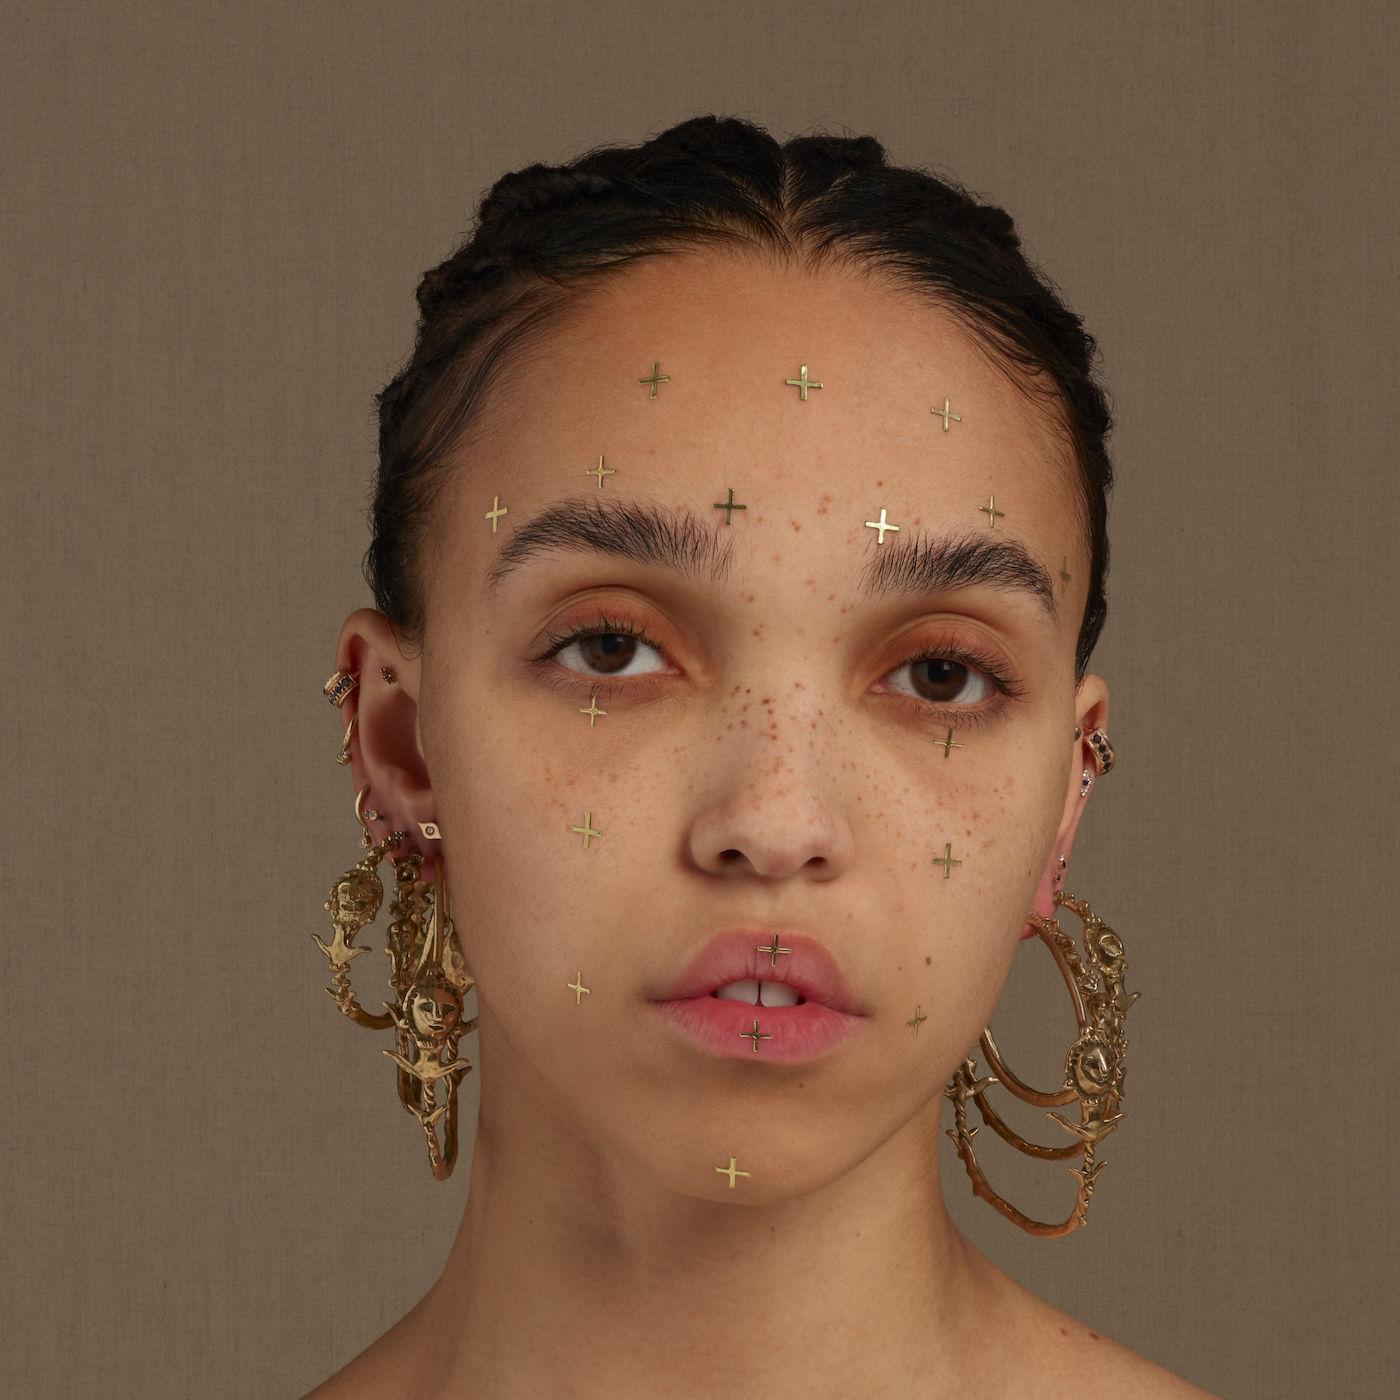 FKA twigs shares haunting new track, 'Cellophane'